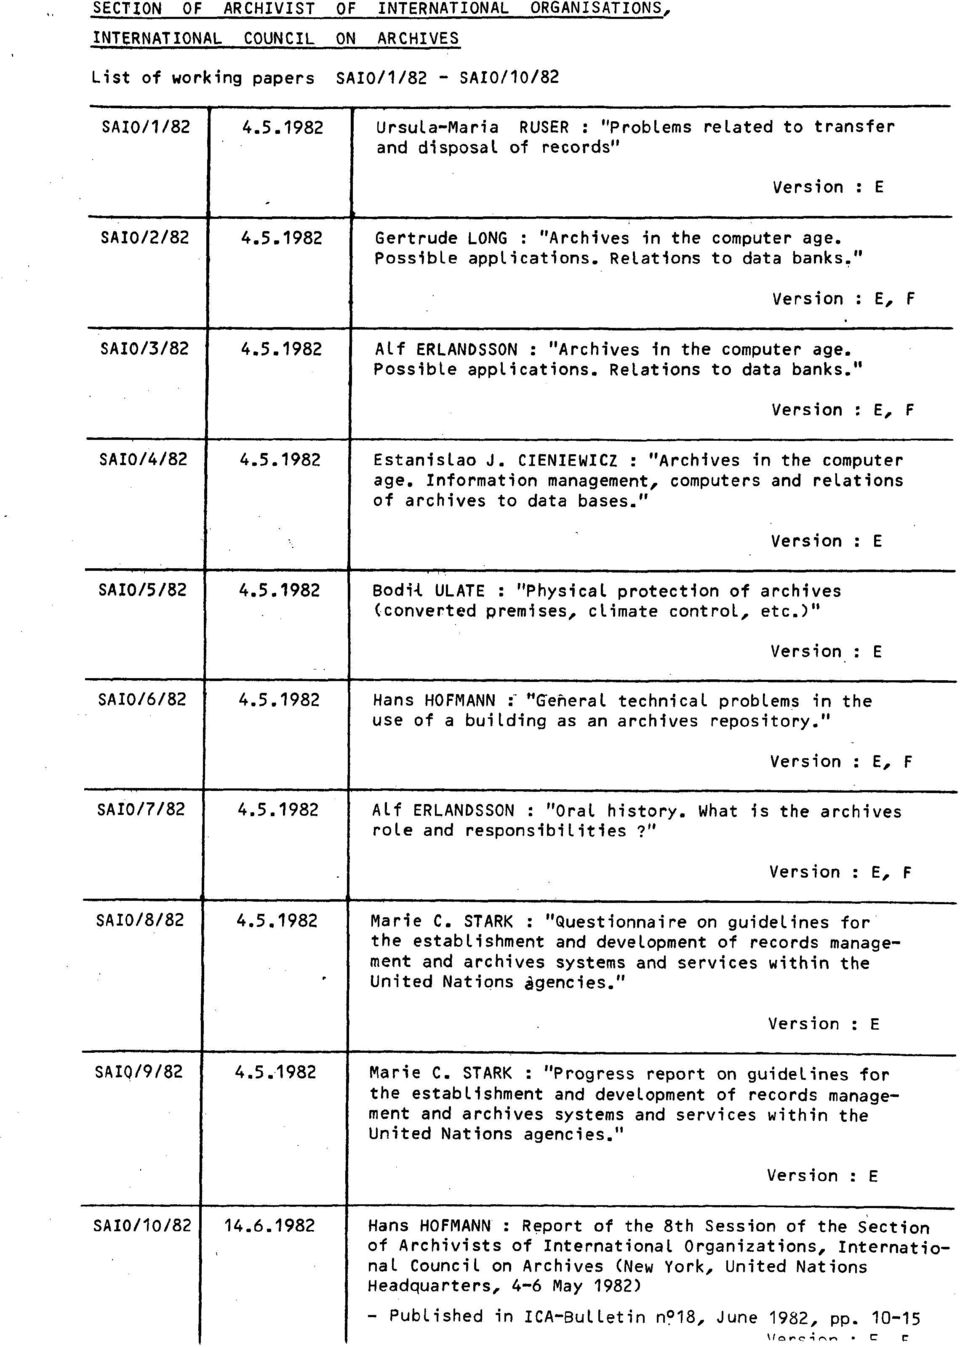 Possible applications. Relations to data banks.' Version : E, F SAI0/4/82 4.5.1982 Estanislao J. CIENIEWICZ : 'Archives in the computer age.